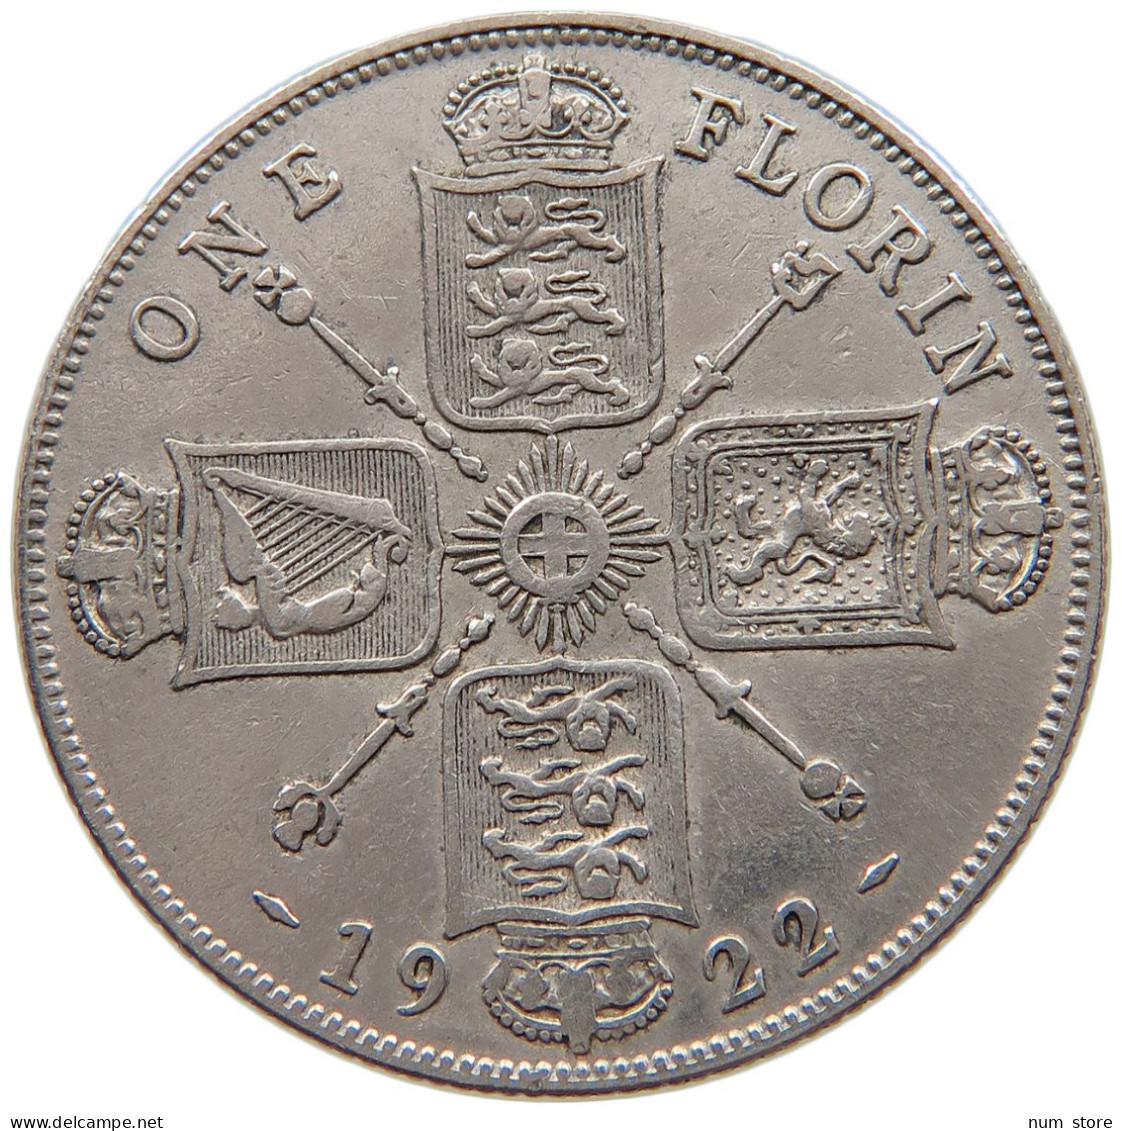 GREAT BRITAIN FLORIN 1922 George V. (1910-1936) #a052 0135 - J. 1 Florin / 2 Schillings